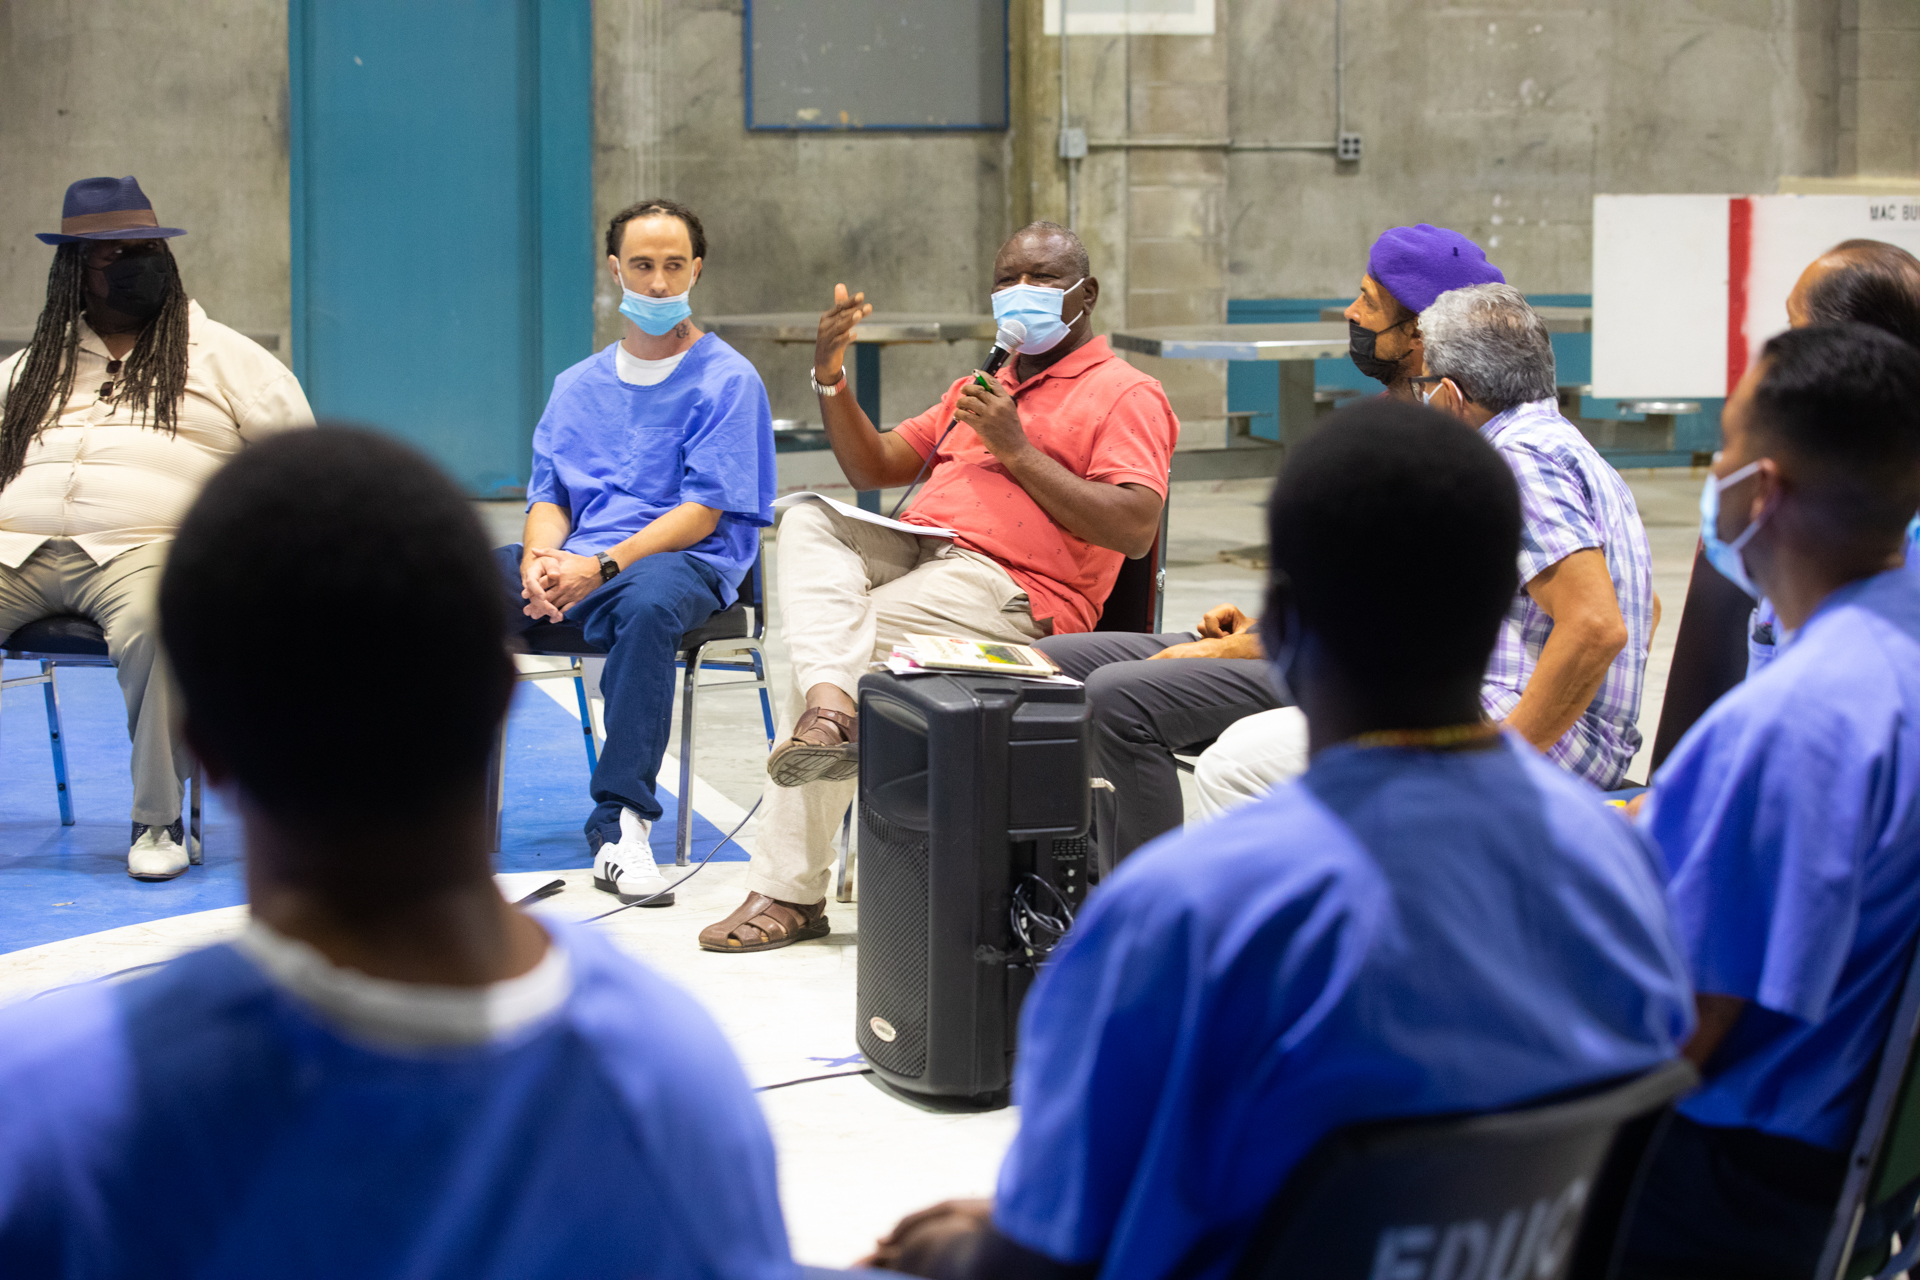 Ernest Uwazie, Sac State Division of Criminal Justice chair, sits in a circle of inmates and restorative justice participants wearing an orange shirt as he addresses the group during a workshop.